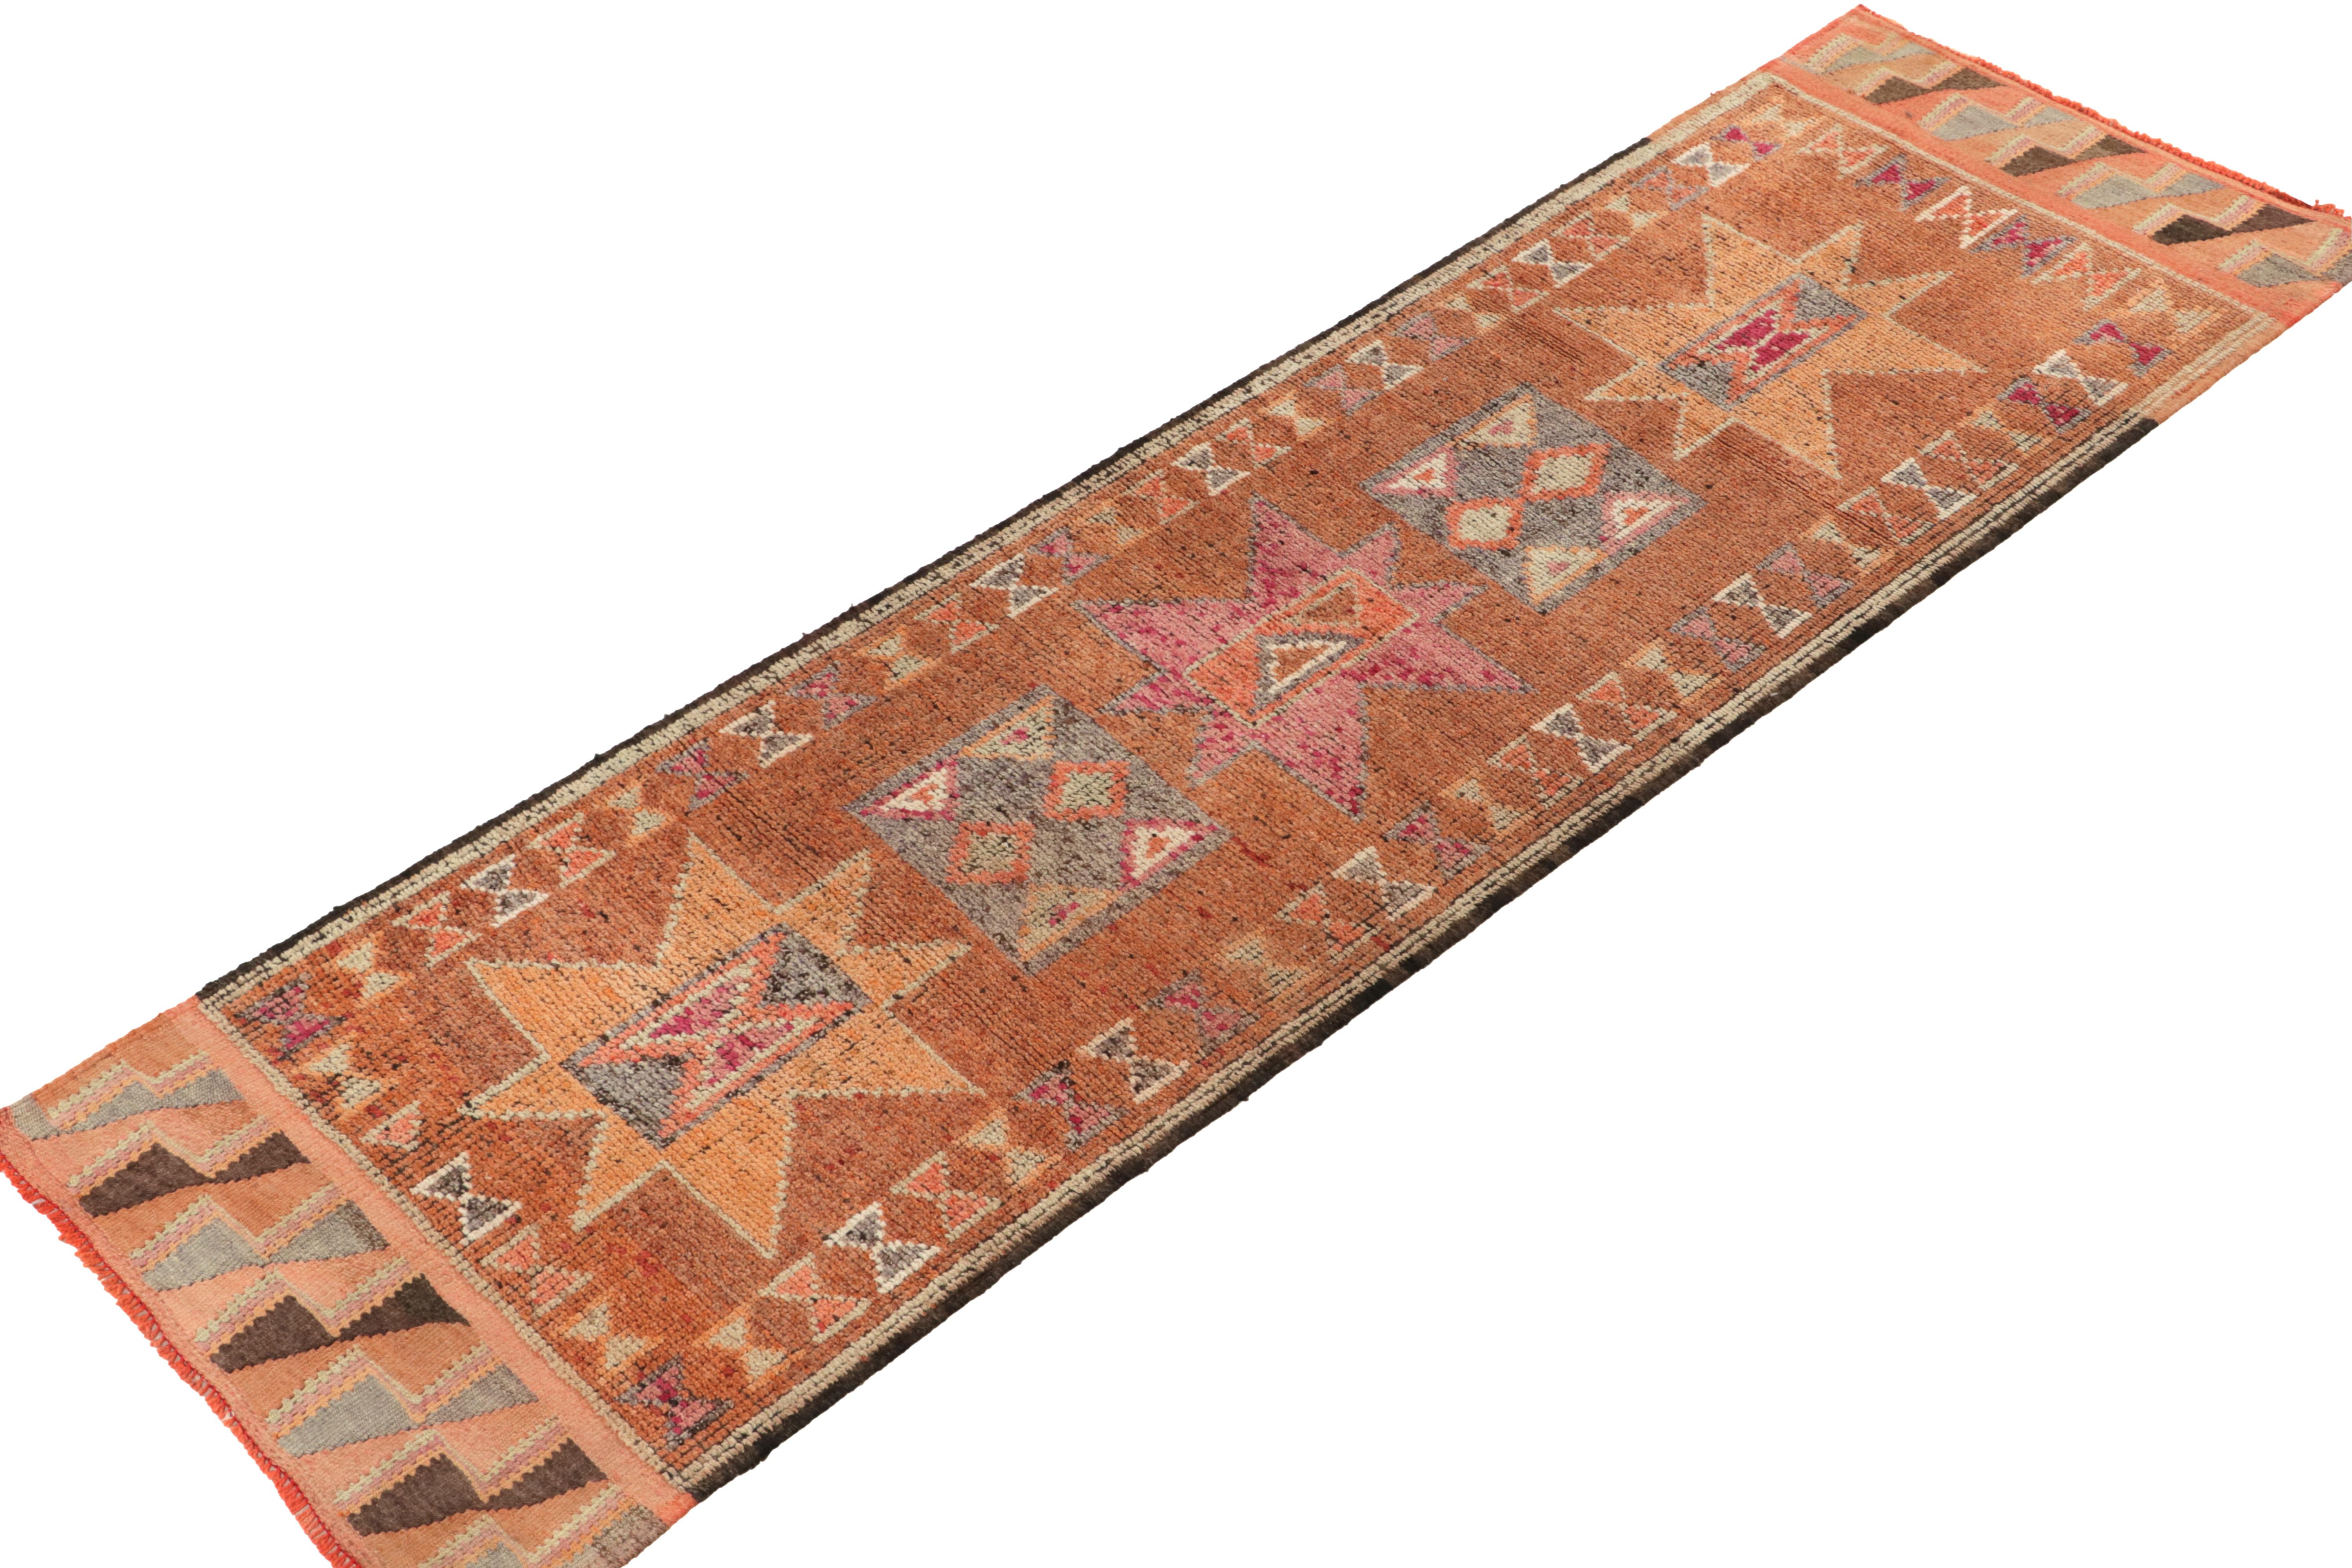 Hand-knotted in wool, a 3x11 runner from Rug & Kilim’s newest curation of extremely collectible tribal pieces. 

Originating from Turkey circa 1950-1960, the rug enjoys traditional medallions on the field in warm orange, gray, pink & brown. The